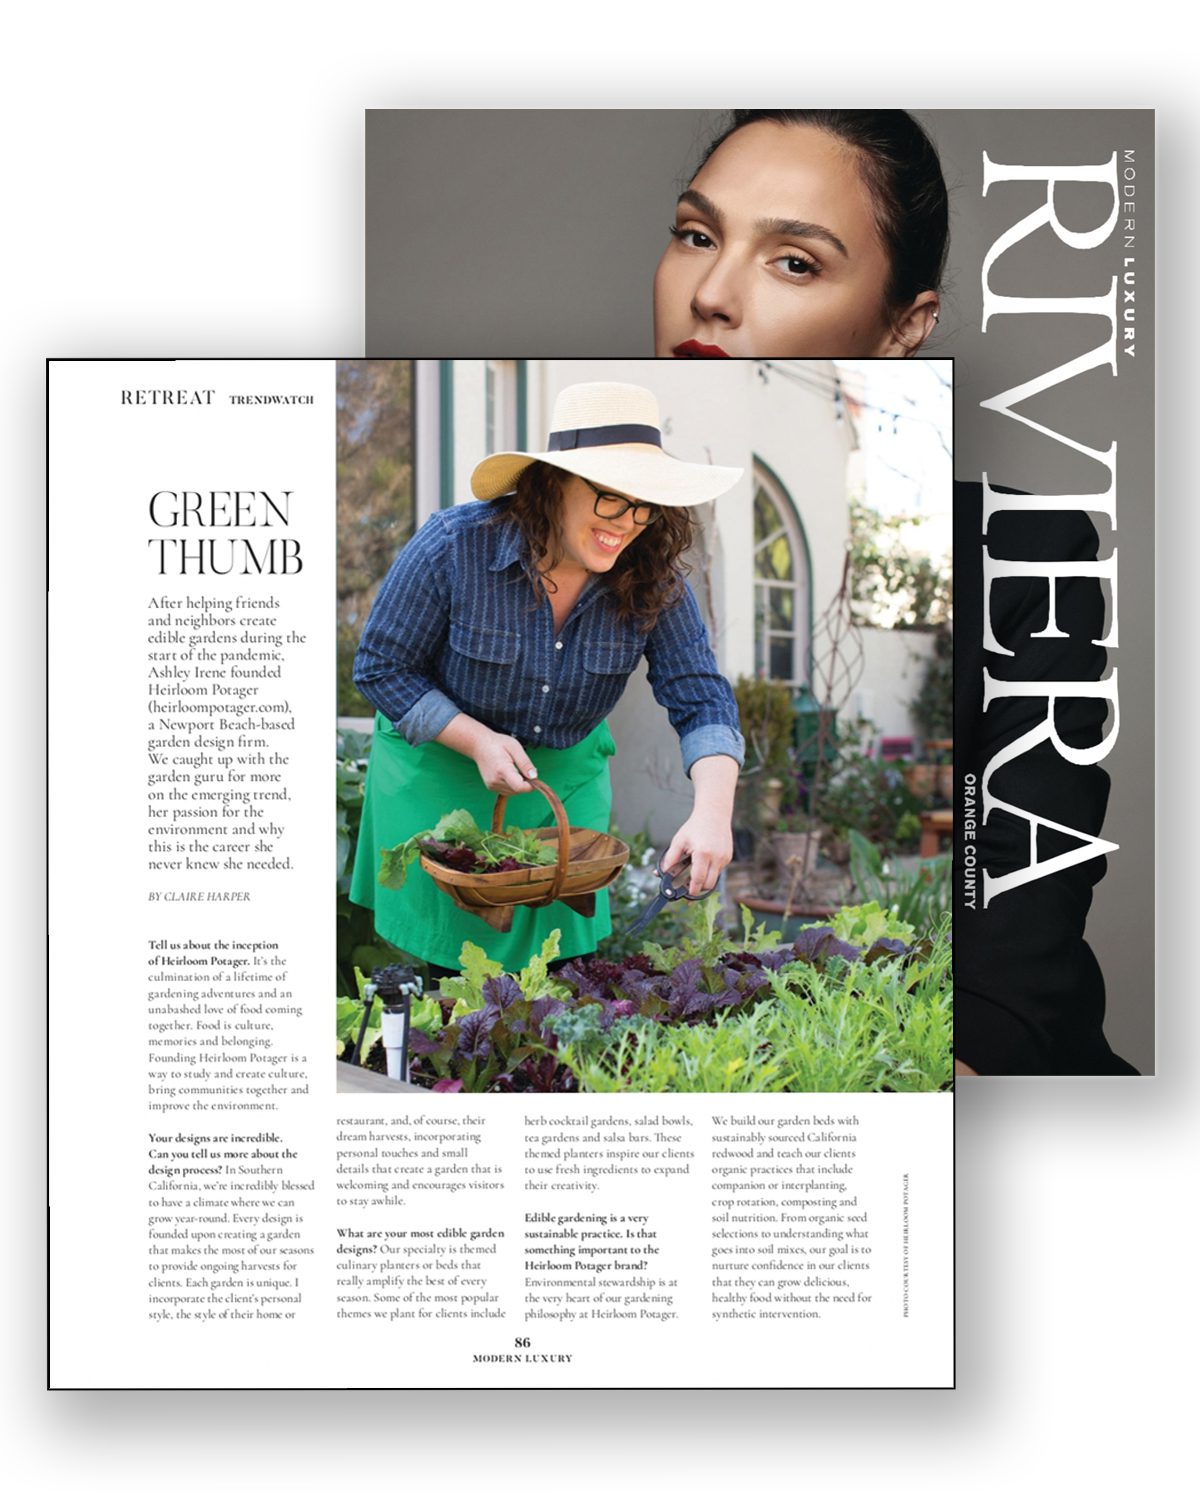 Heirloom Potager featured in May 2021 Riviera Magazine